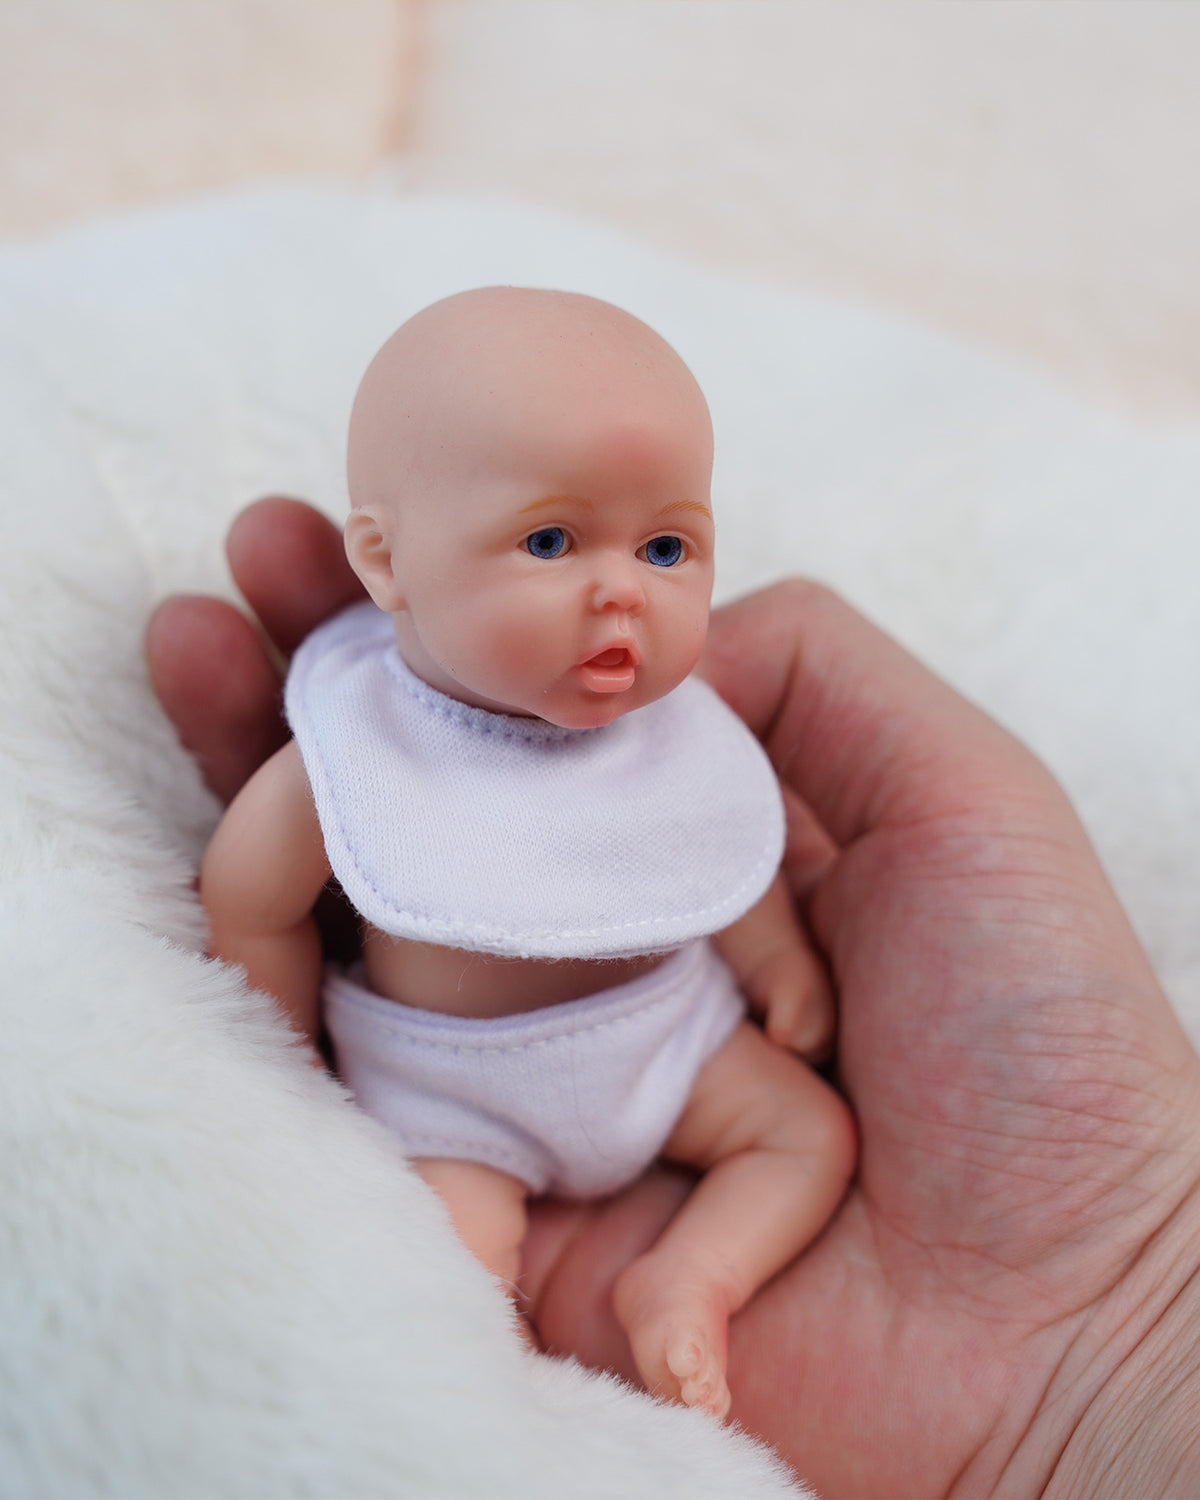 Mia - 6" Full Silicone Reborn Baby Dolls Realistic Newborn Baby with a Soft and Elastic Texture